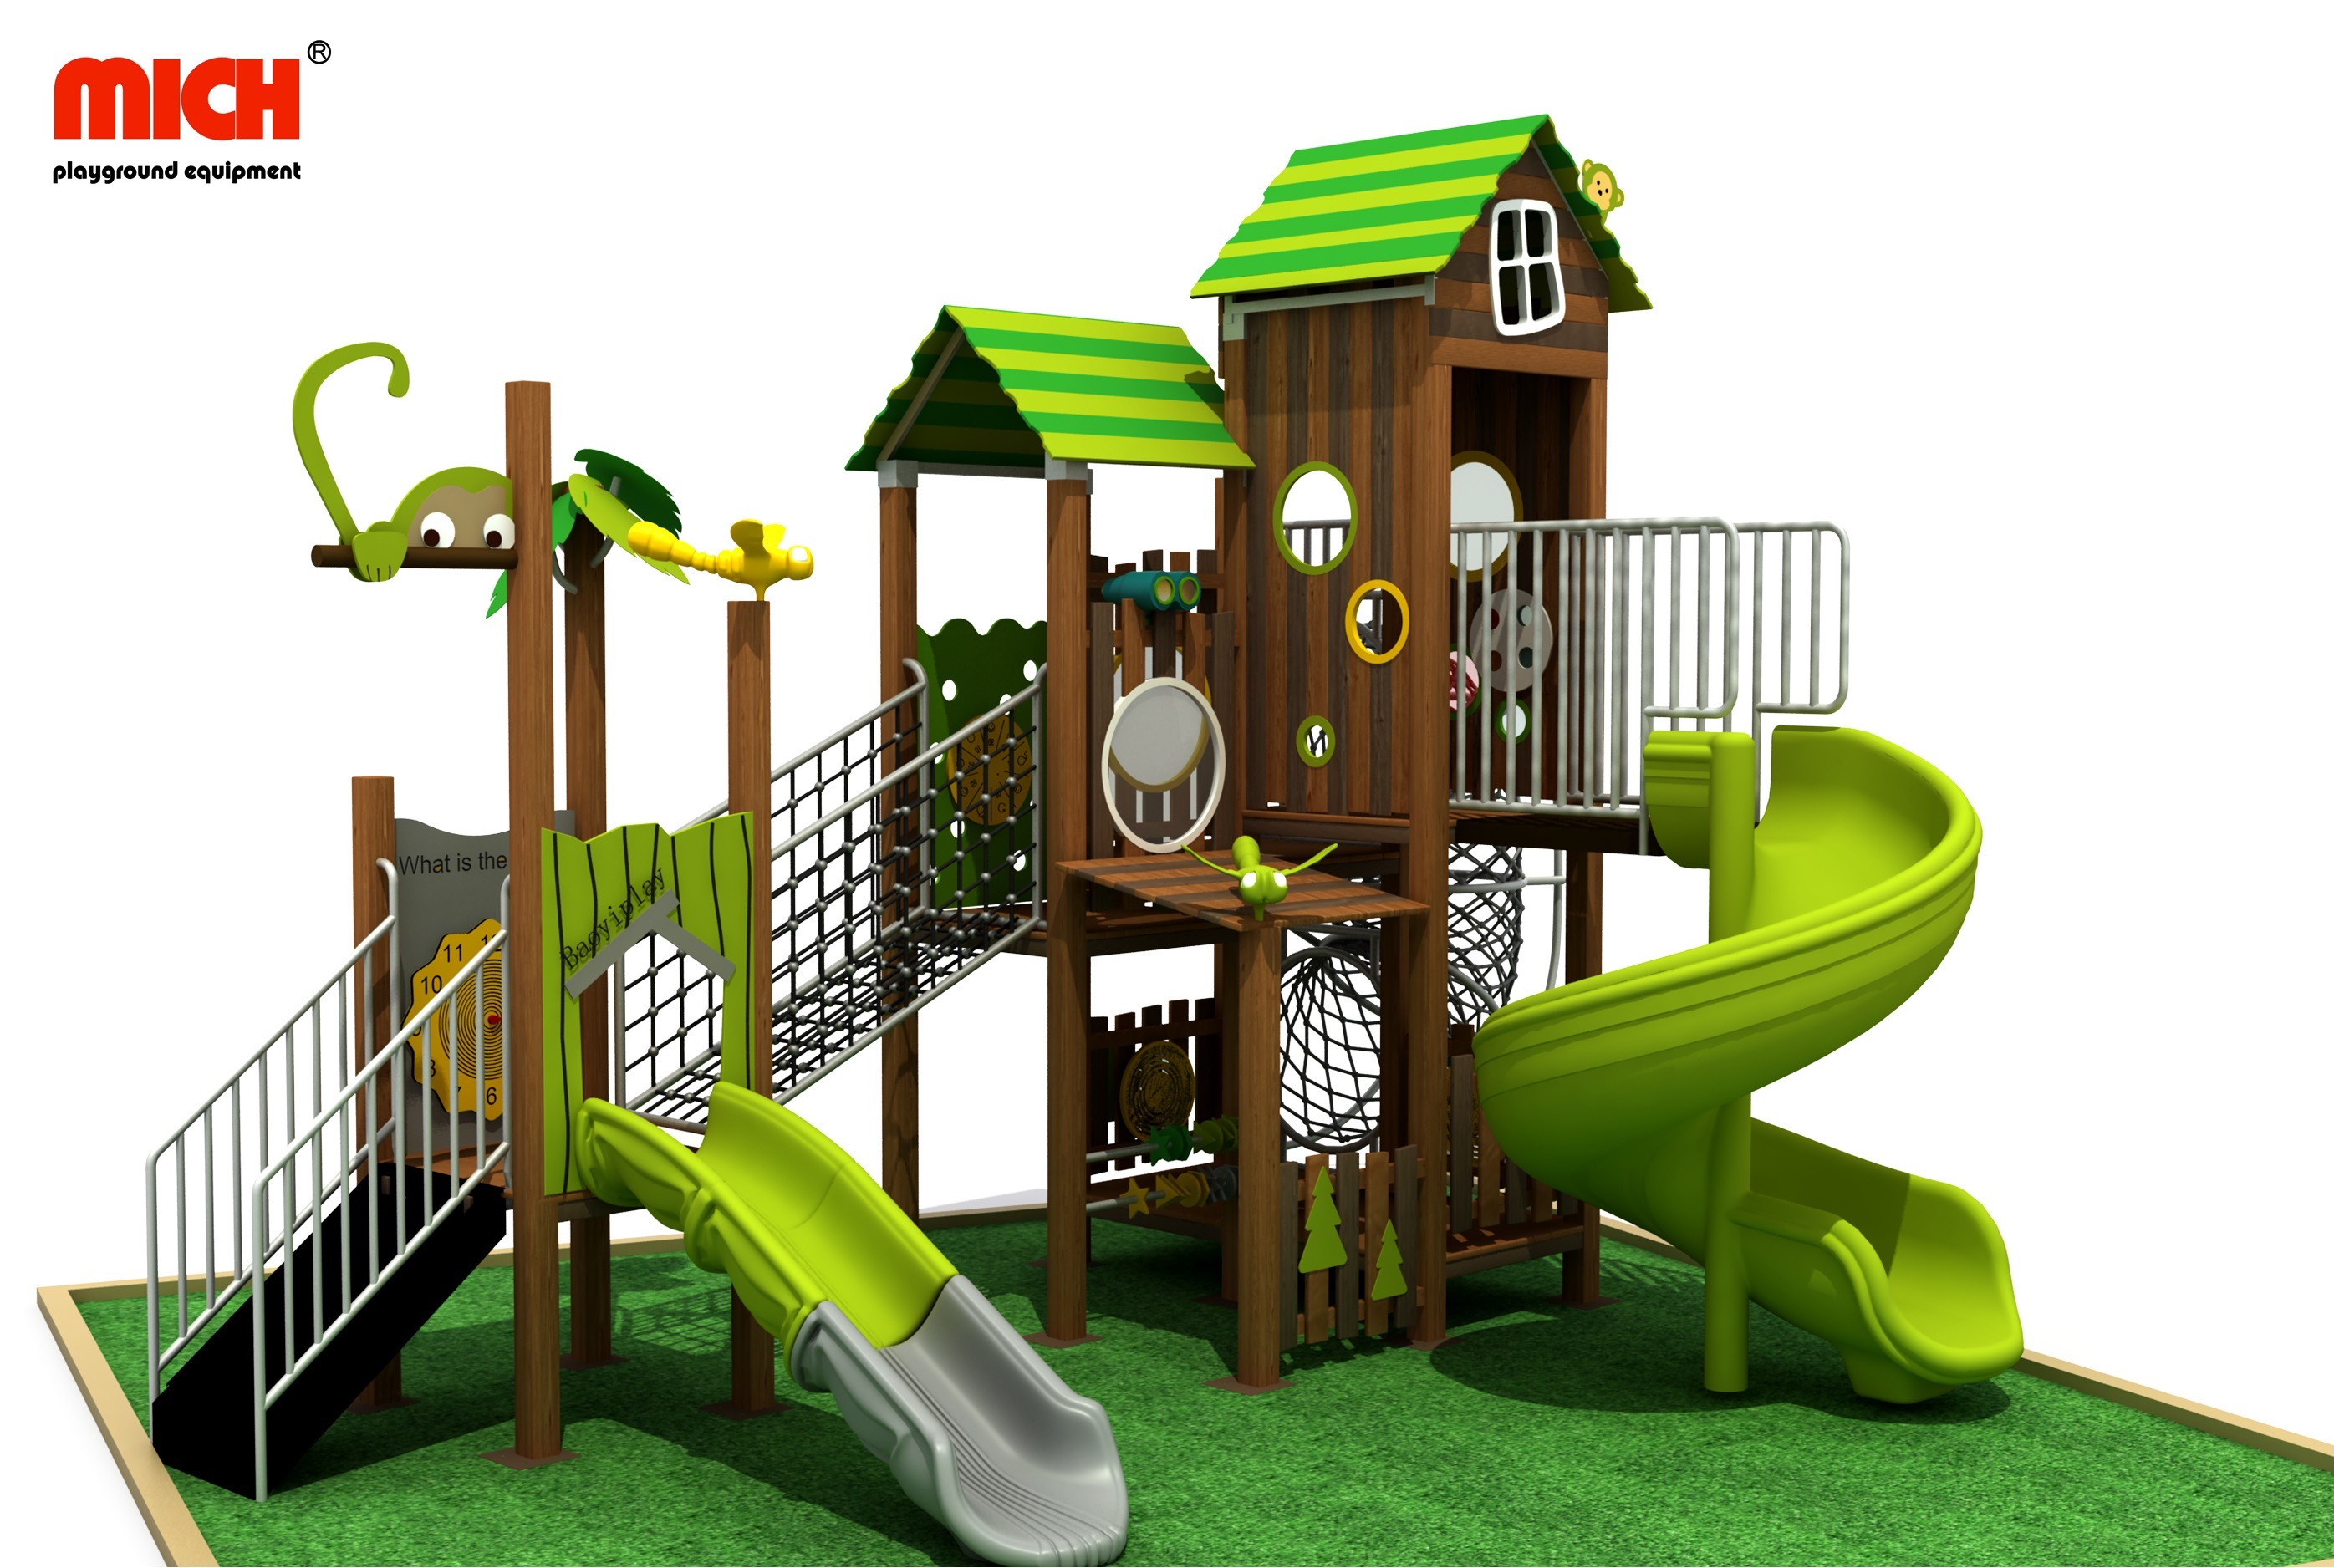 What is the function of outdoor playground equipment?